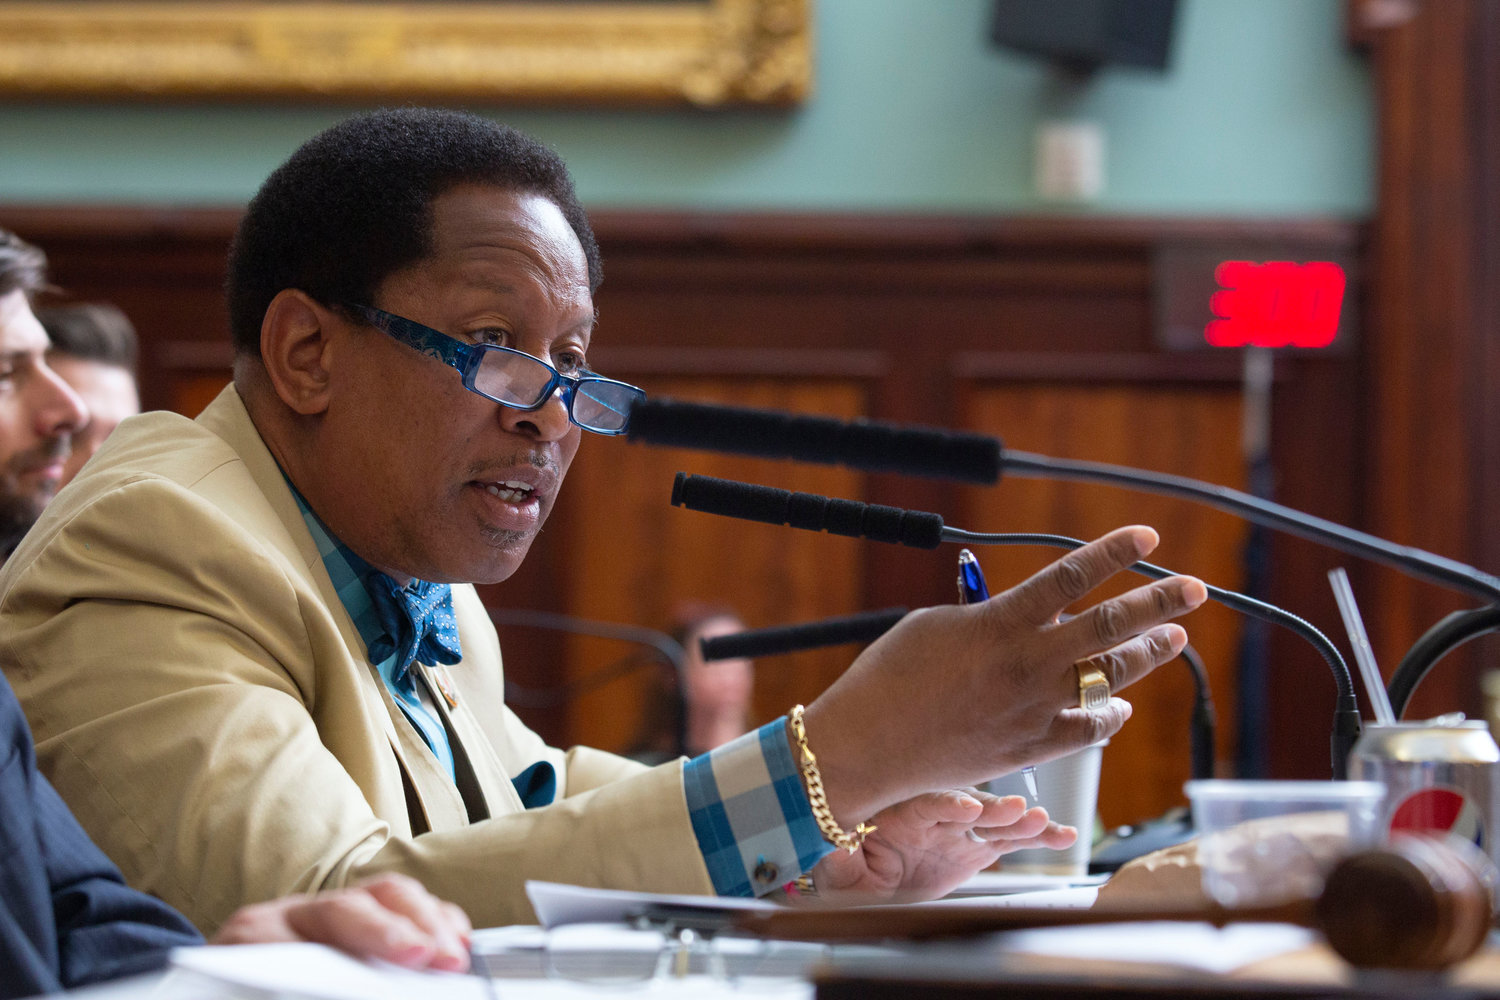 Andy King, who formerly represented parts of the east Bronx on the city council, was expelled by his colleagues last week after an investigation report by the council’s ethics committee were released. The expulsion was the first since at least the mid-1980s.